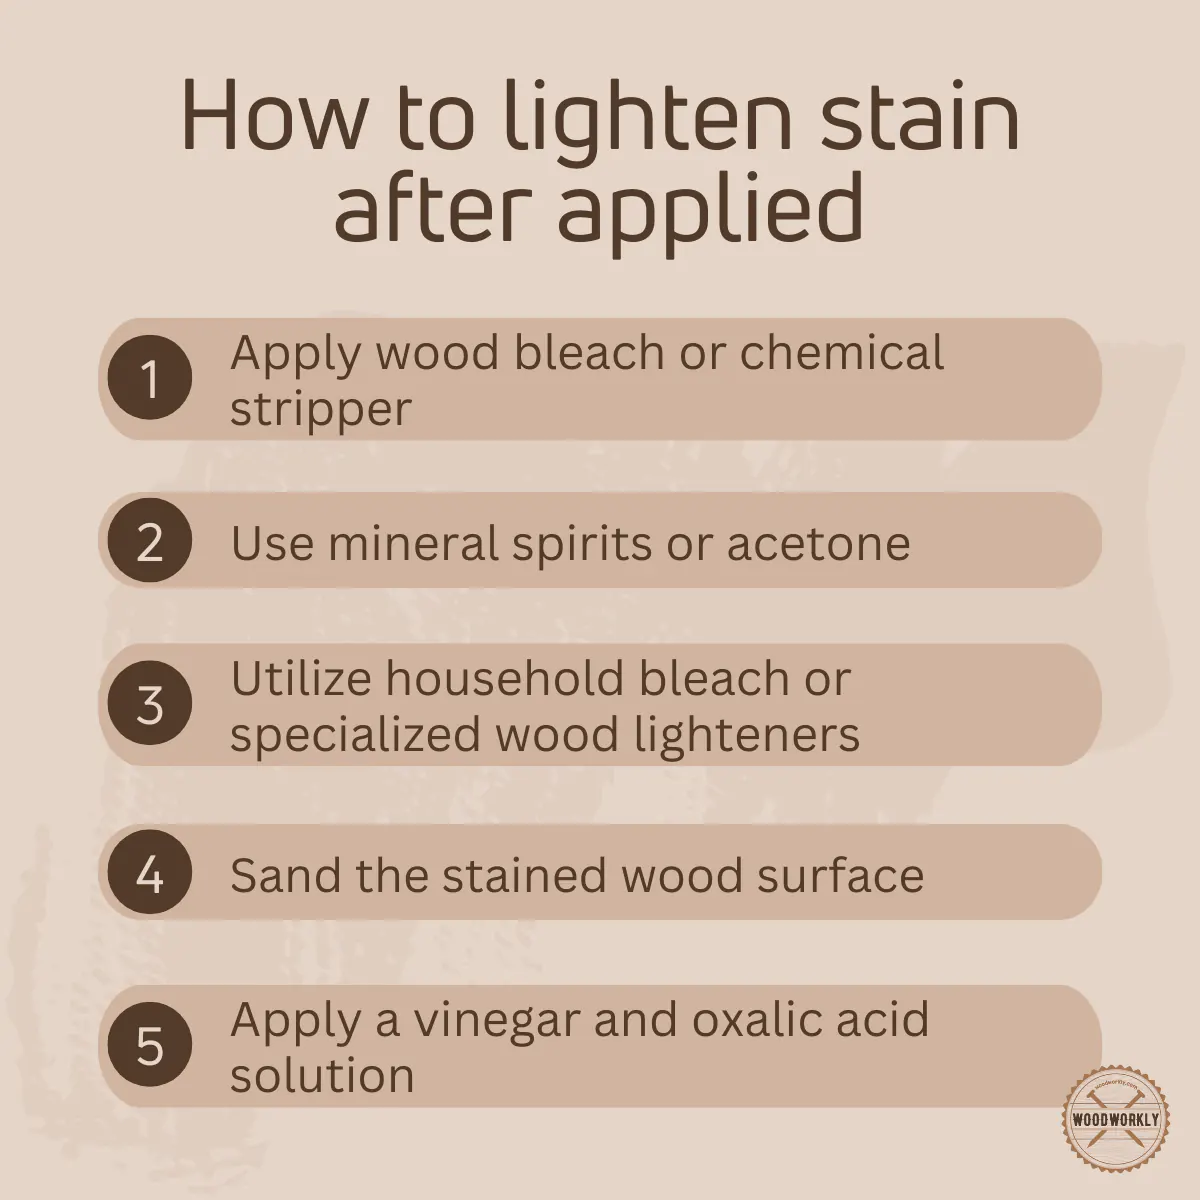 How to lighten stain after applied